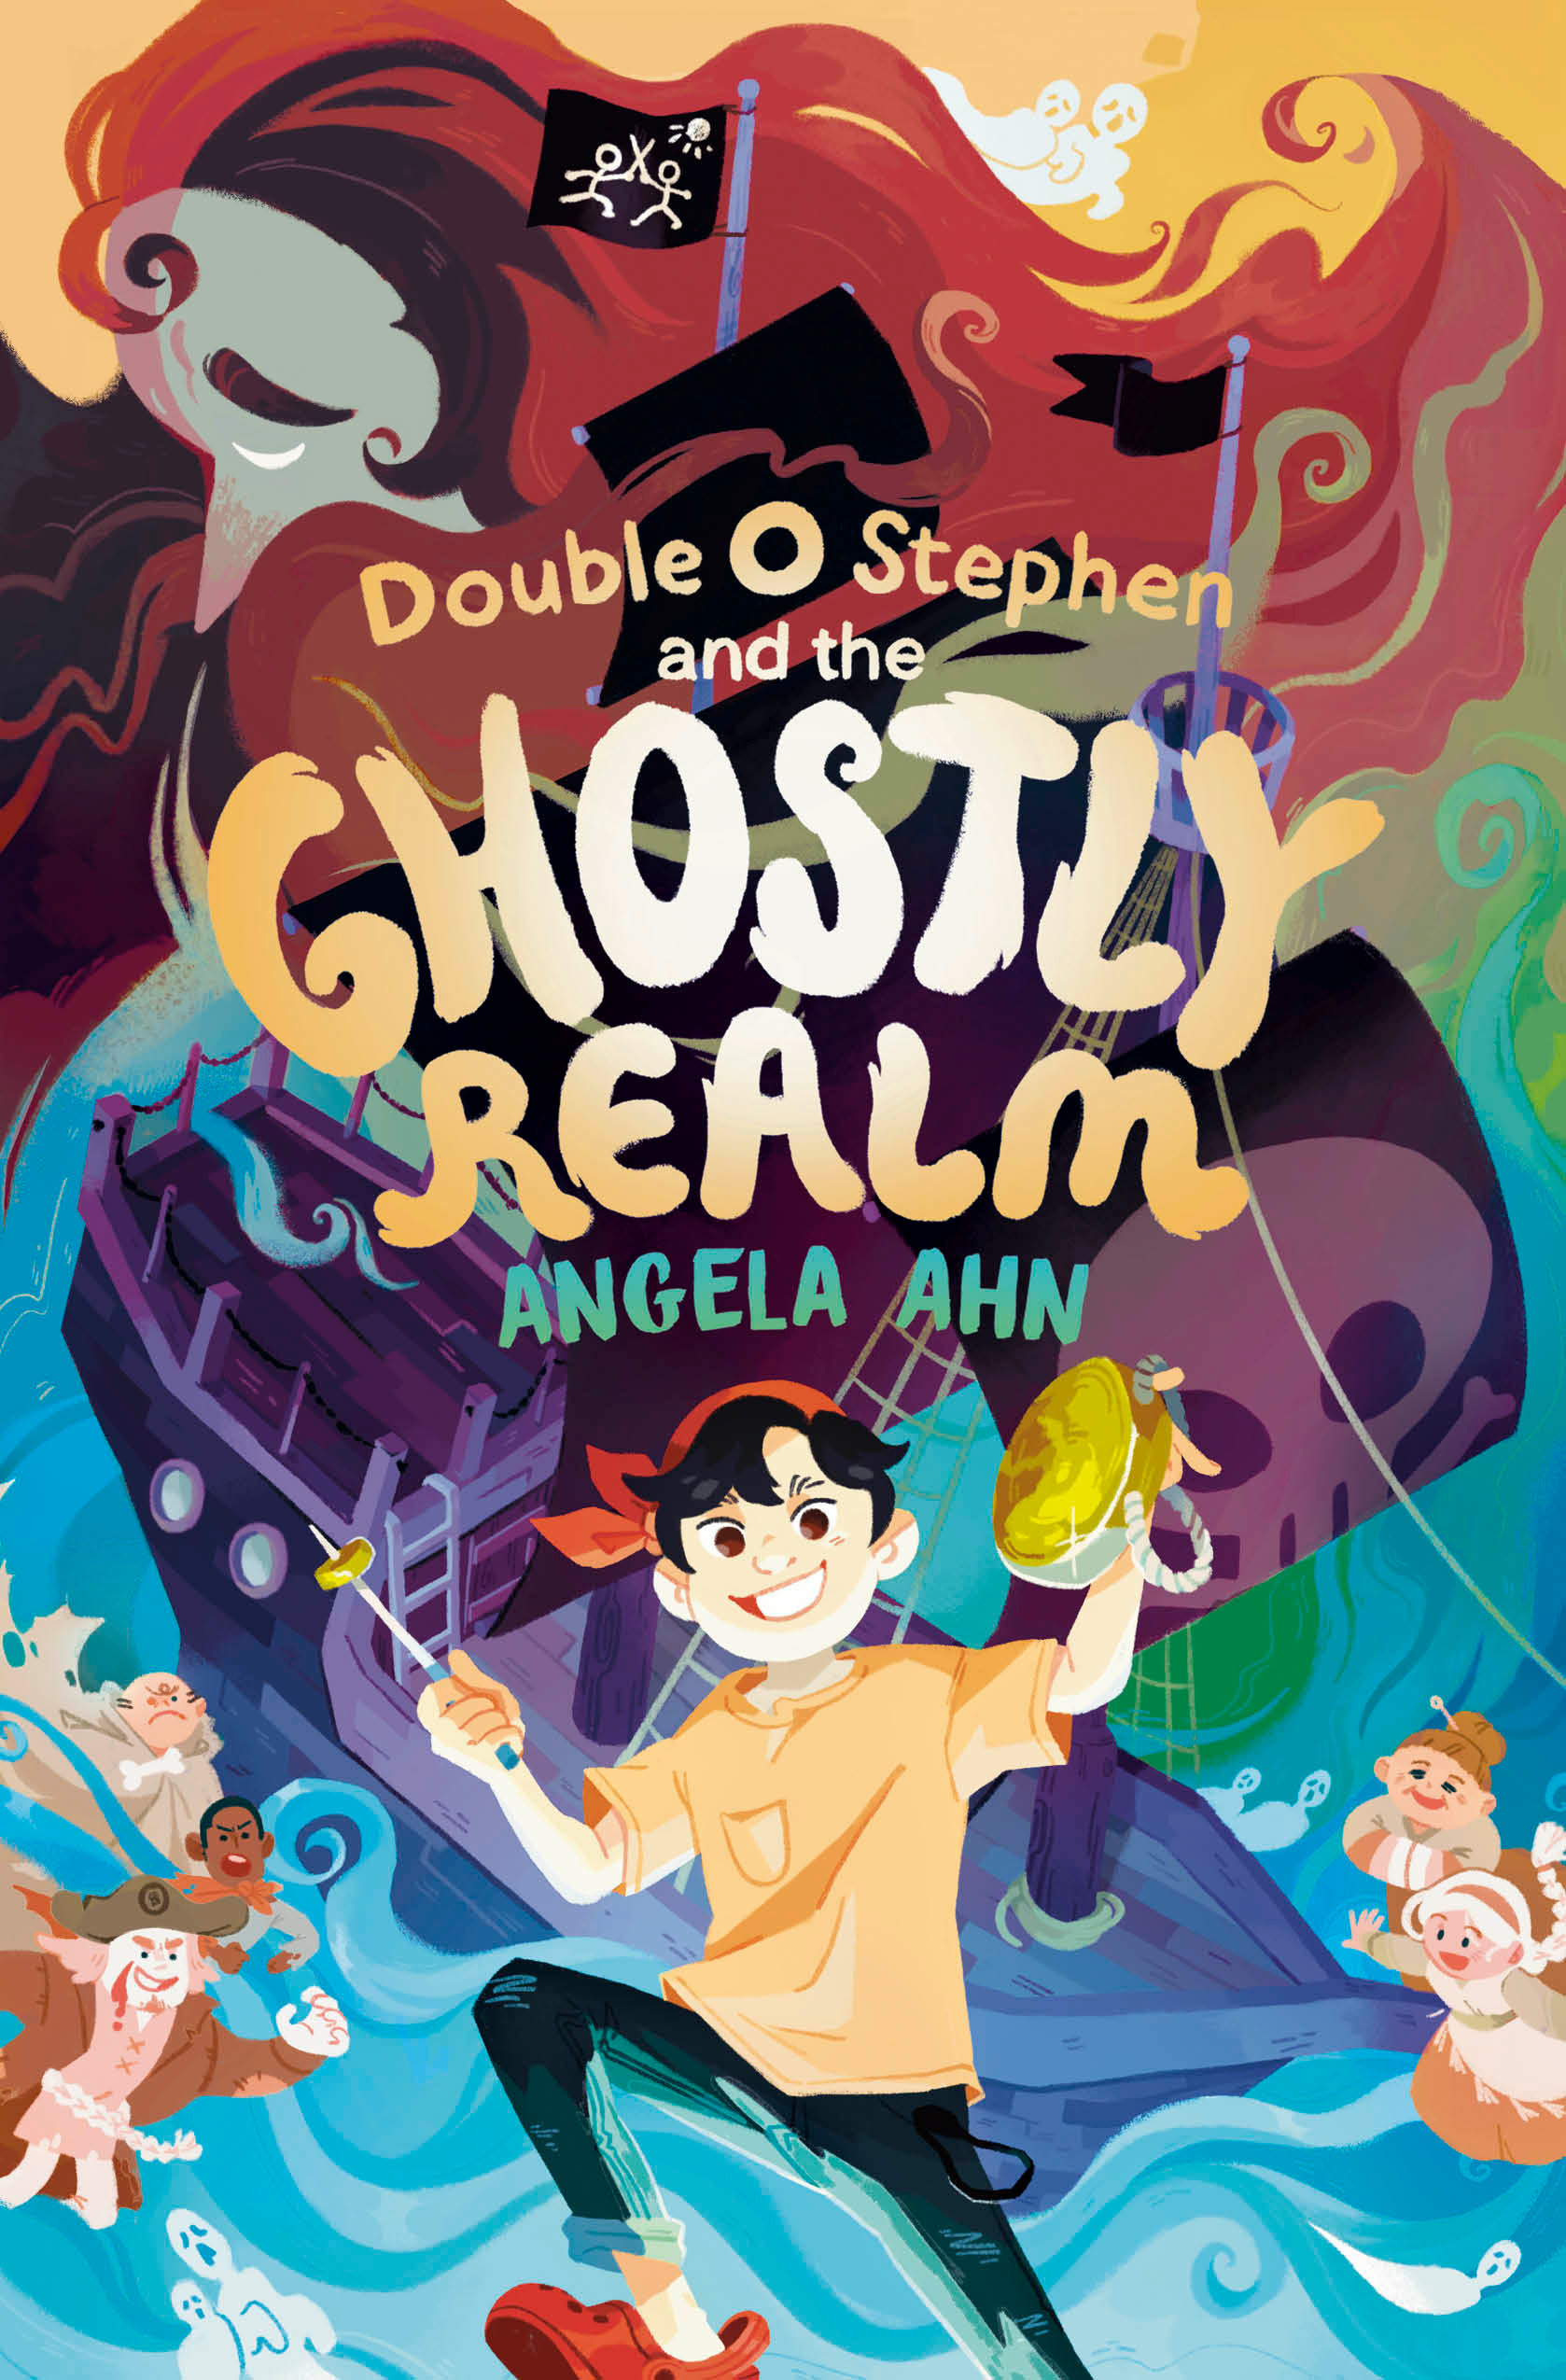 Double O Stephen and the Ghostly Realm (Hardcover Book)